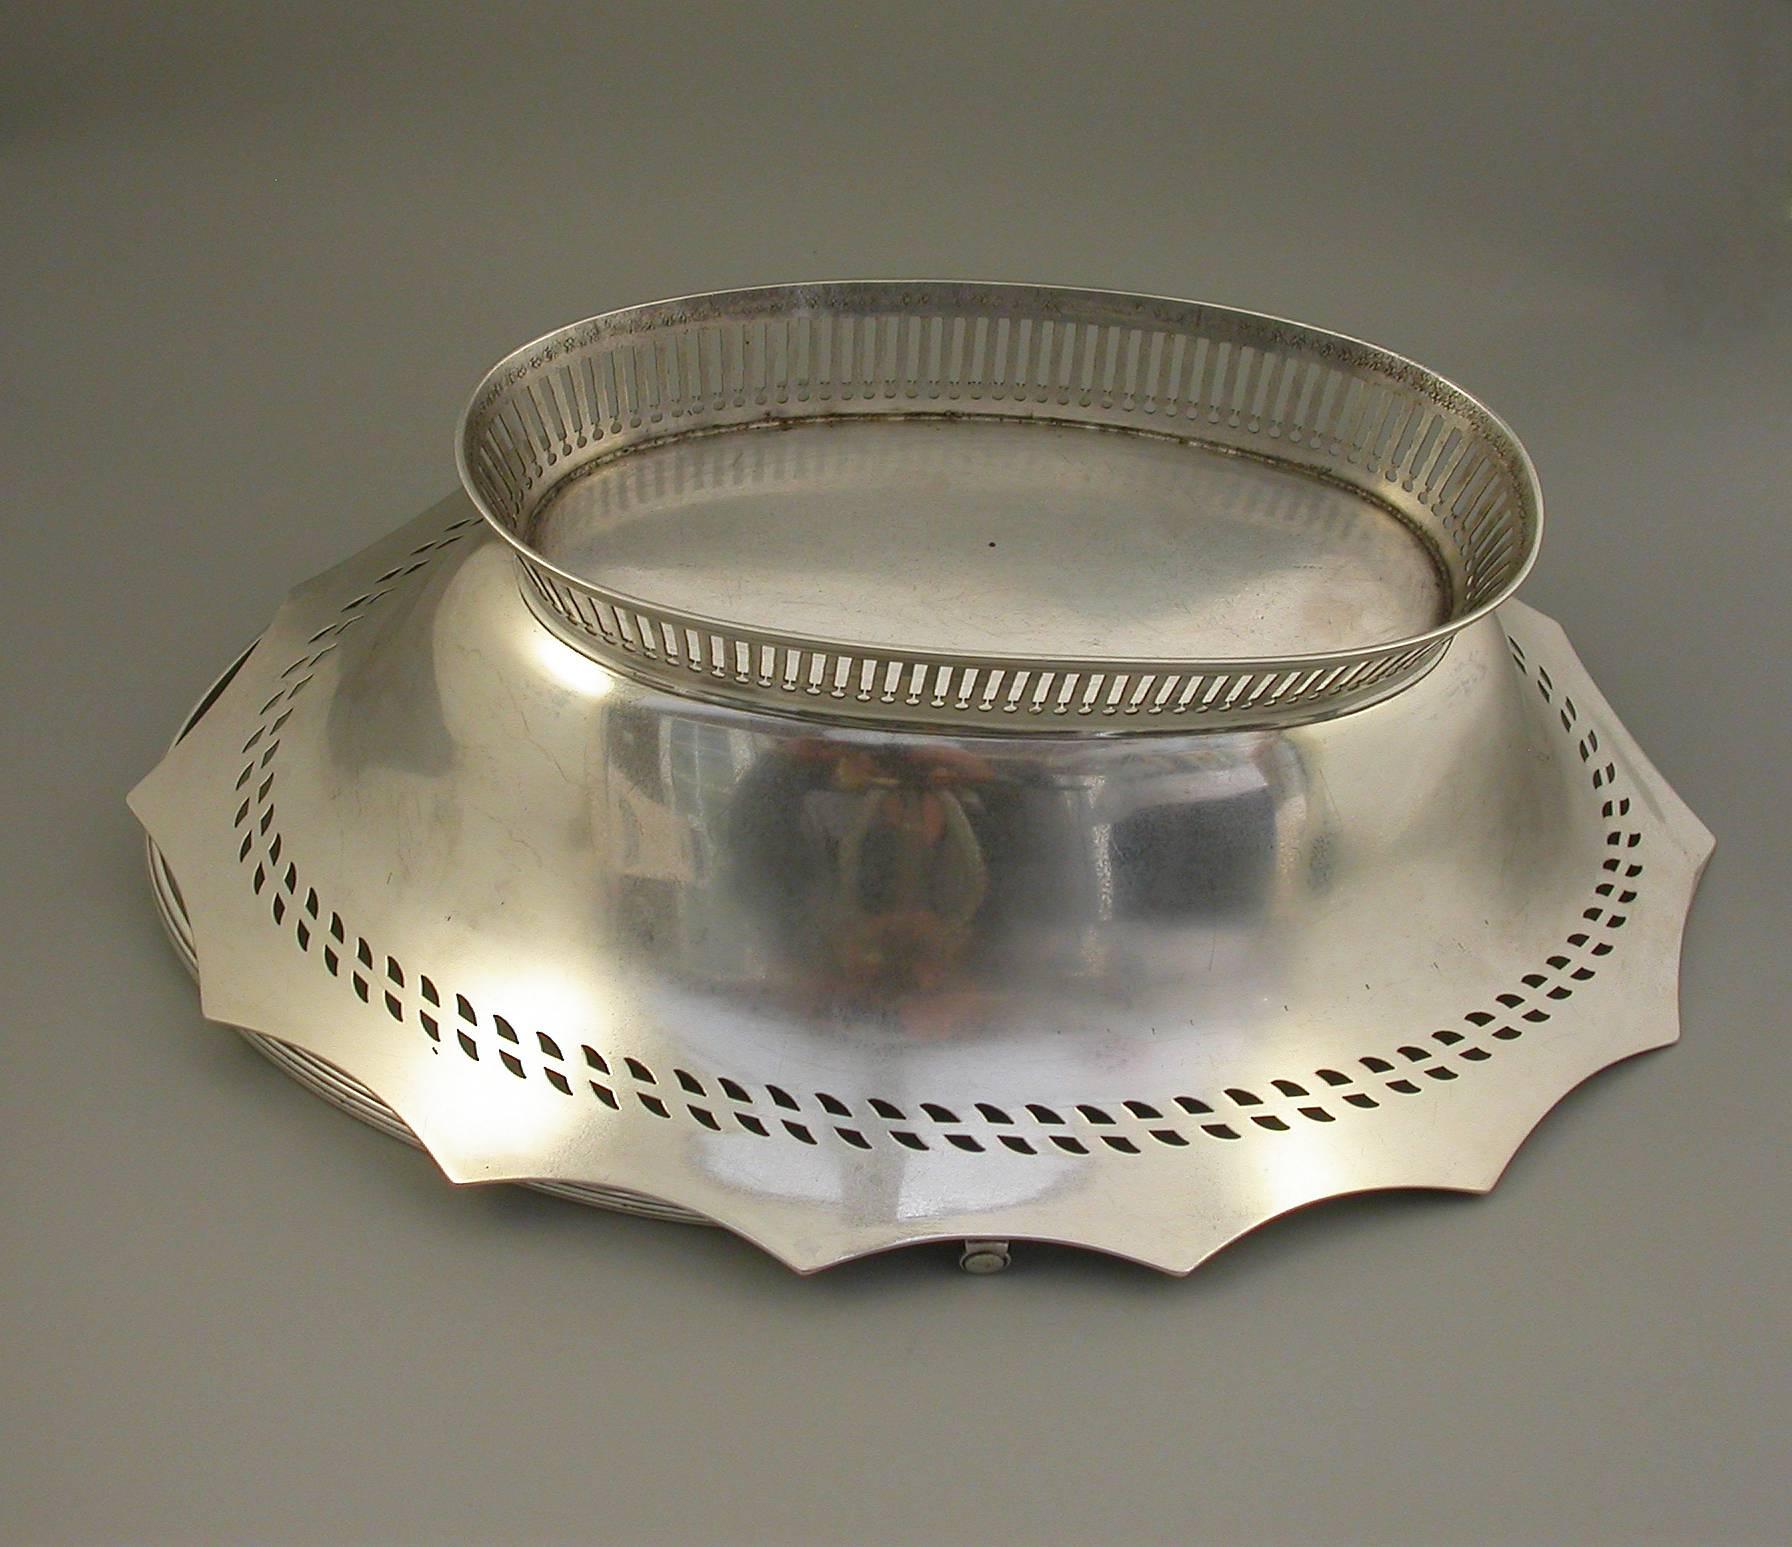 English George III Silver Swing Handled Cake Basket. by Robert Hennell, London, 1789